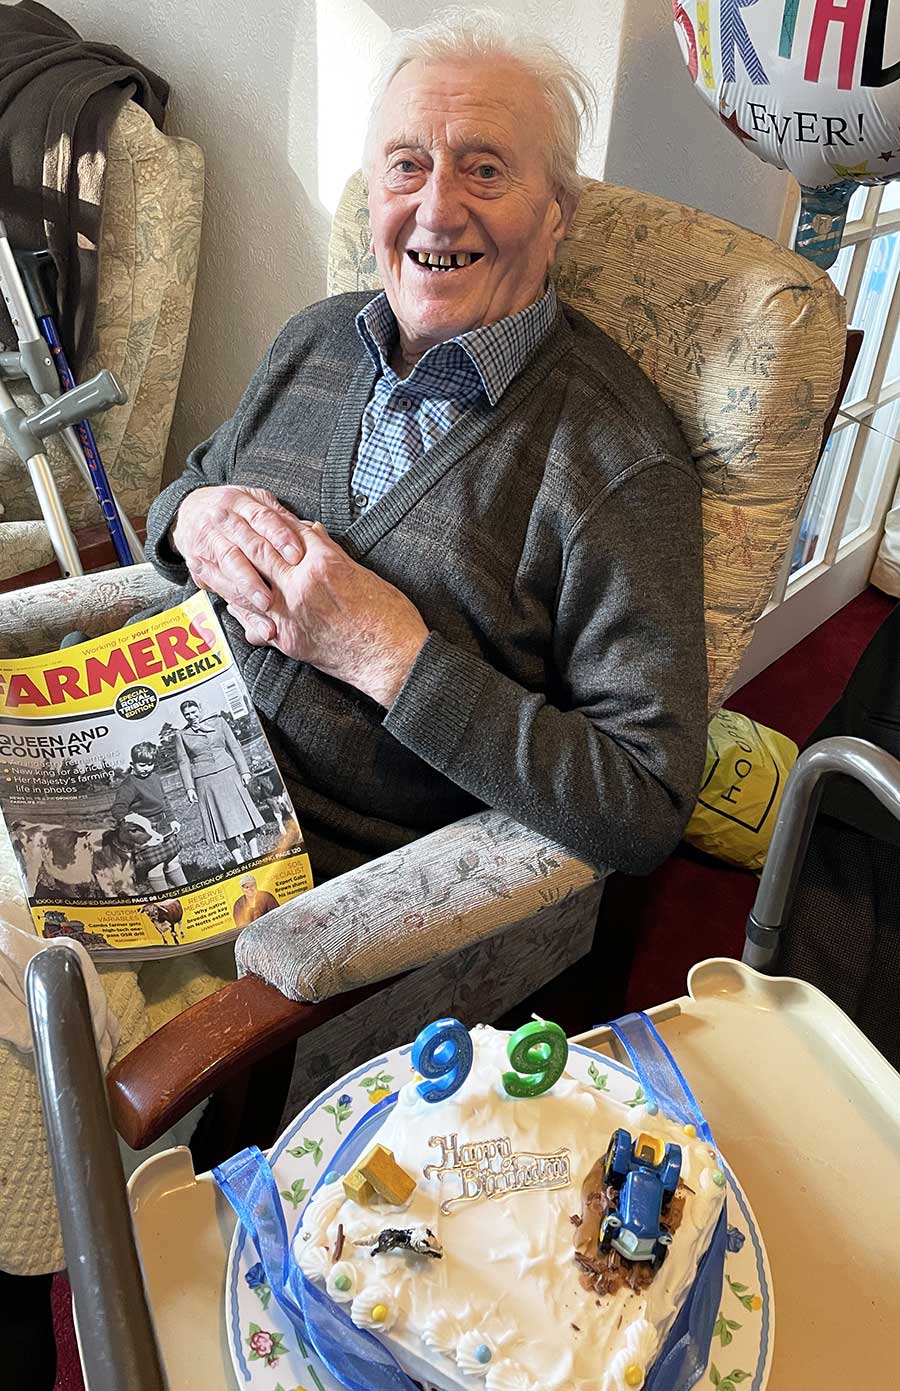 Farm grandad with his birthday cake and copy of Farmers Weekly